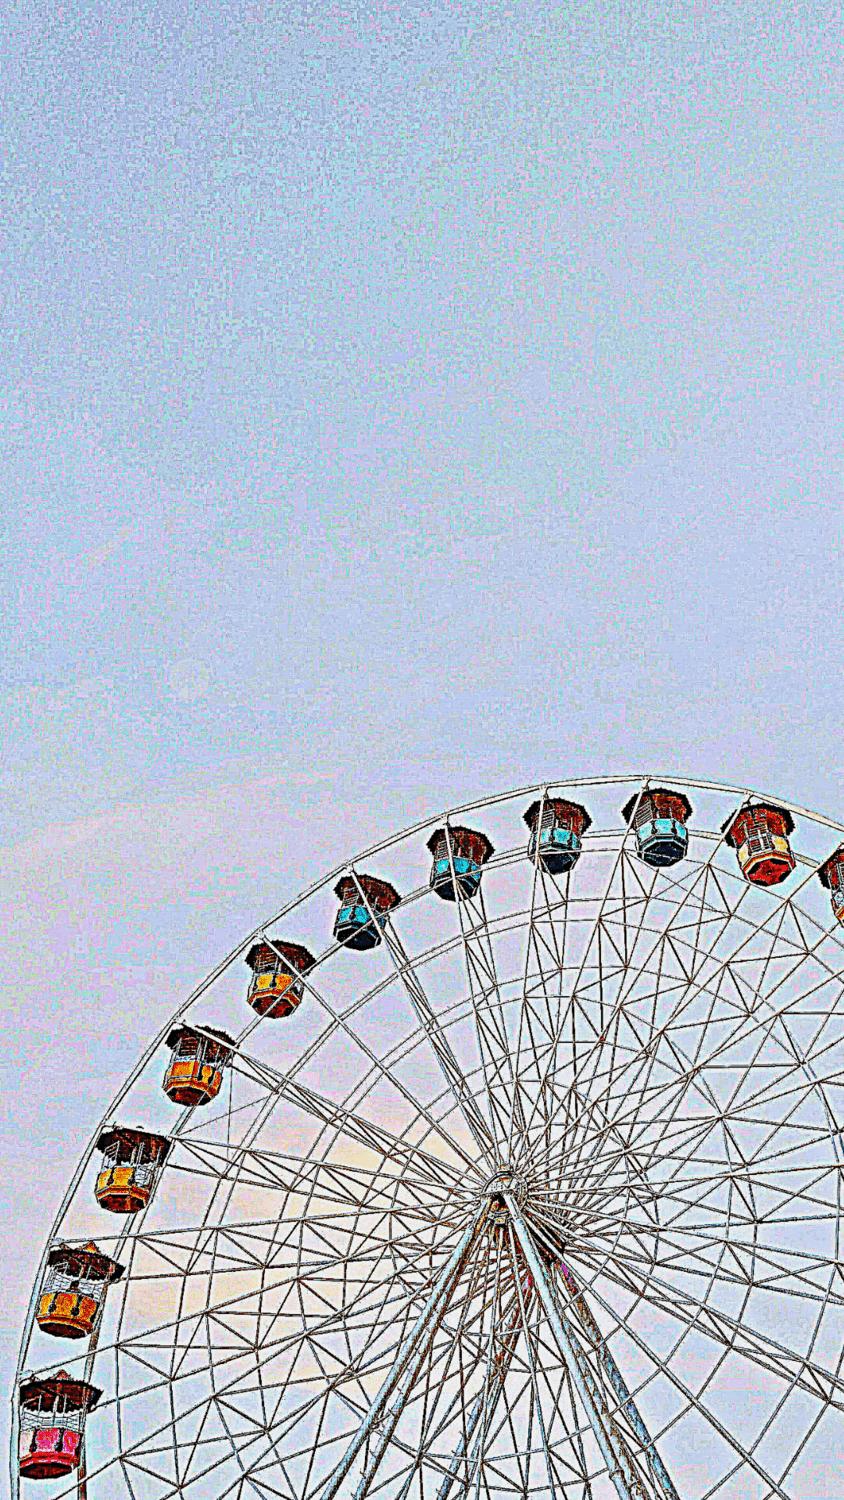 A Ferris wheel with cars on it in the sky. - Kidcore